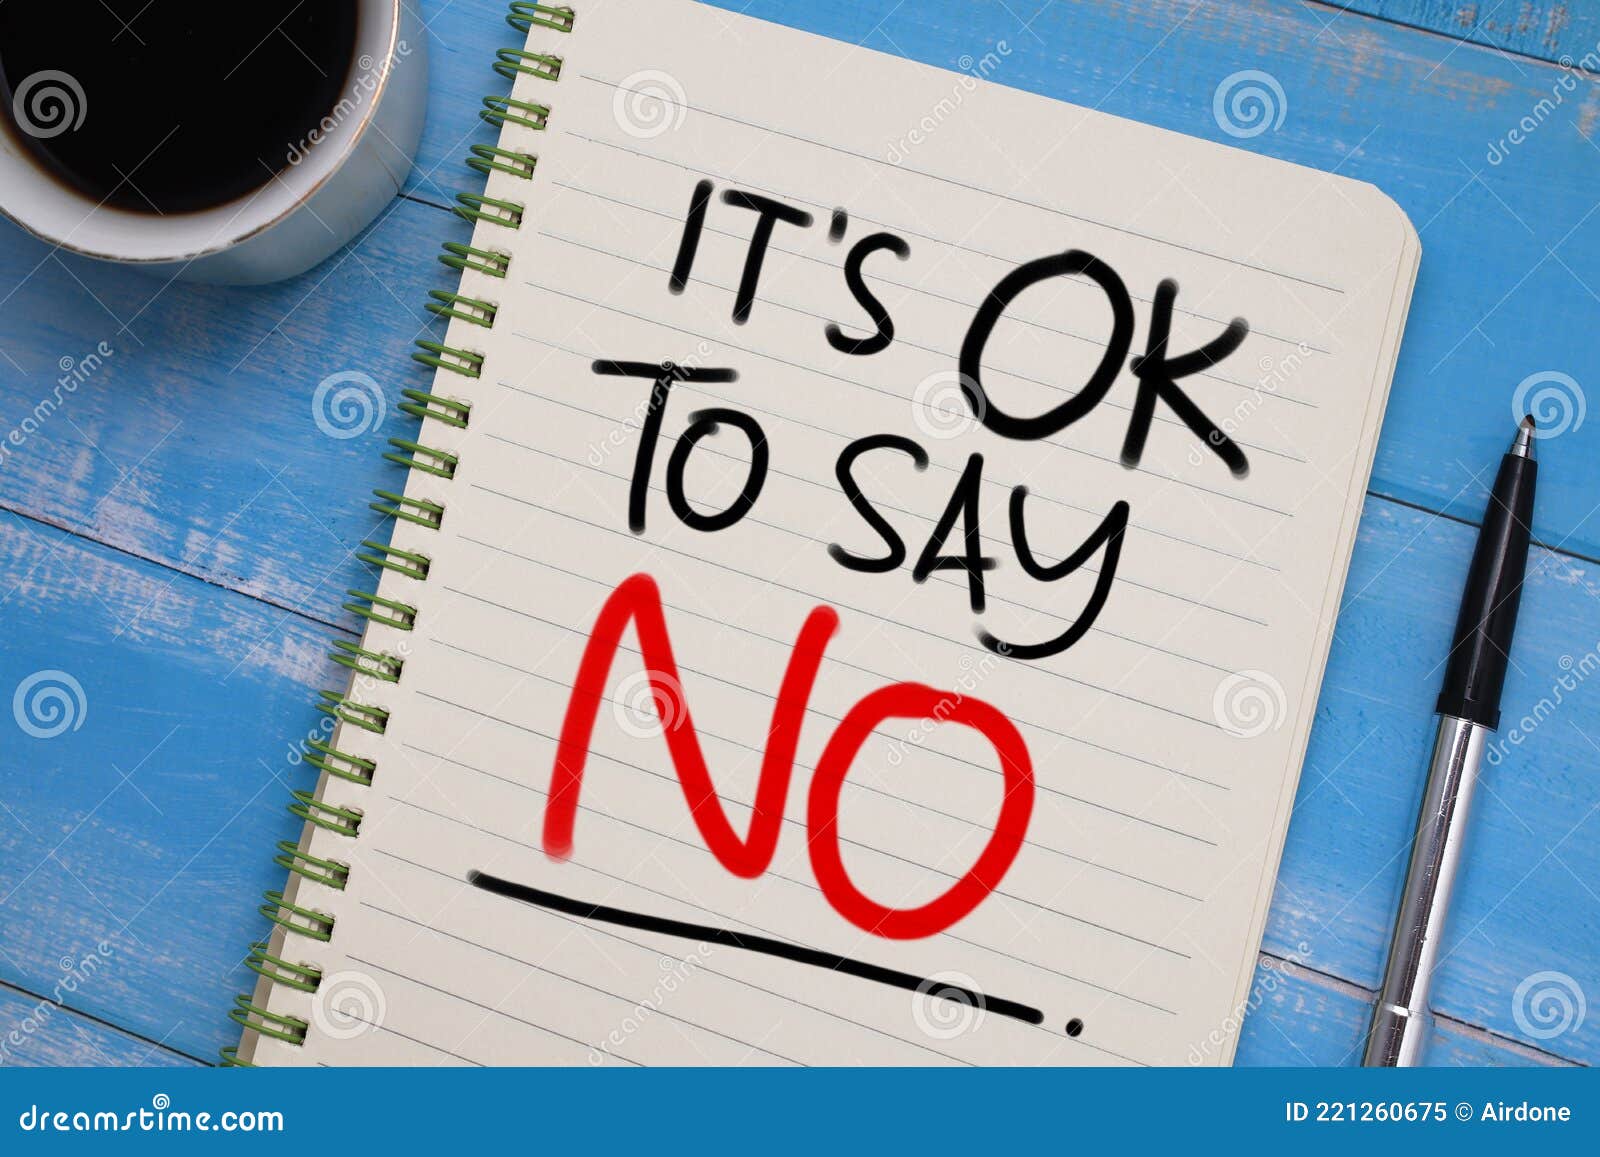 its ok to say no, text words typography written on paper, life and business motivational inspiration